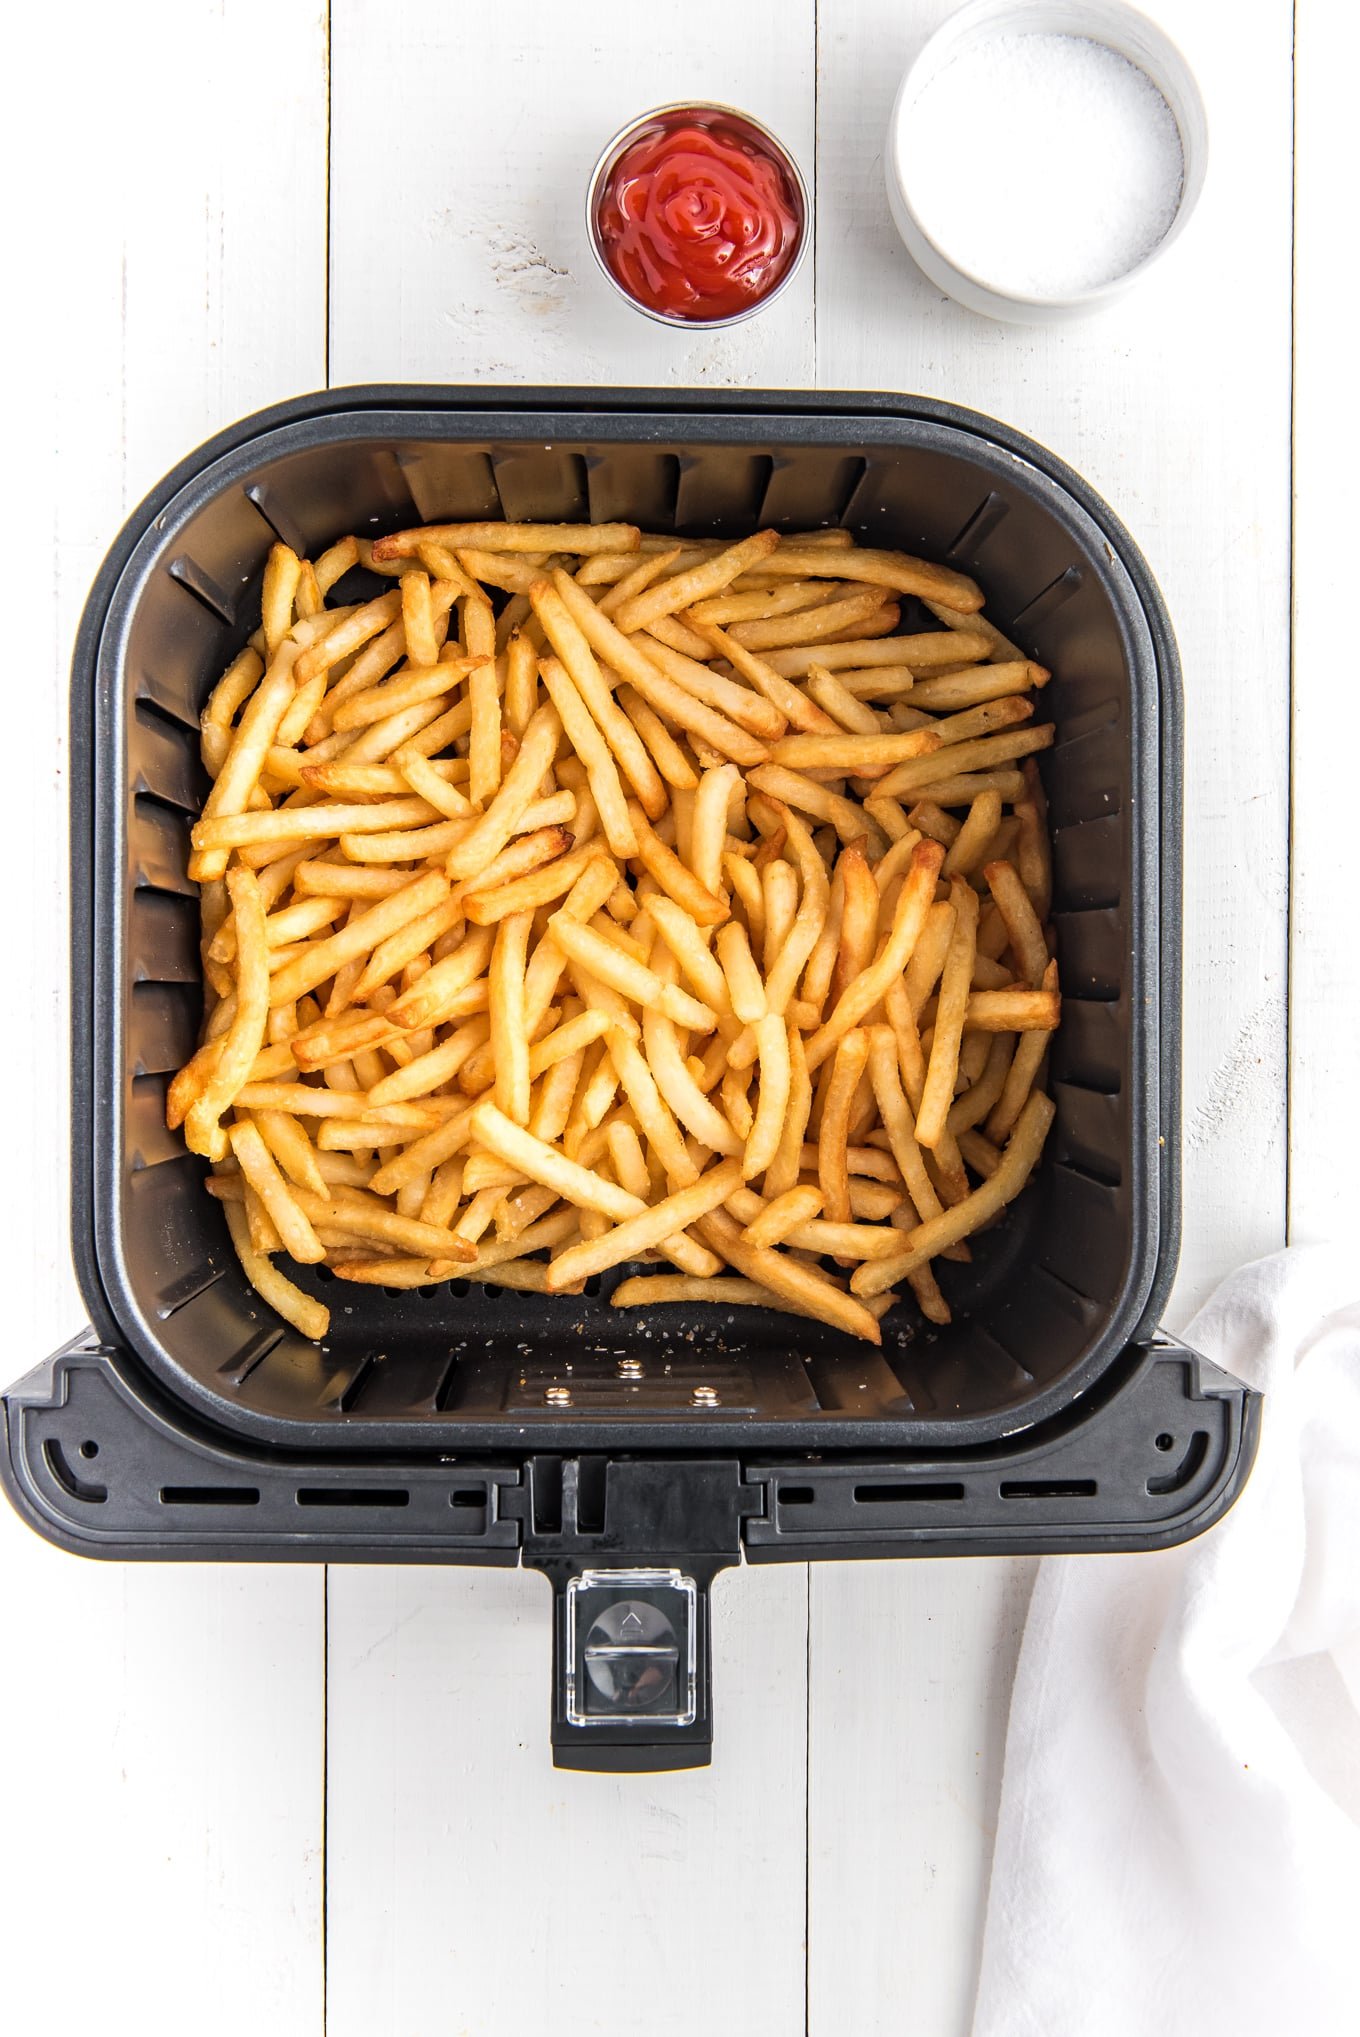 frozen french fries in air fryer. /Enjoy crispy and delicious frozen French fries in minutes with this easy air fryer recipe. Get that classic crispy texture and savory flavor you love, with the convenience of the air fryer.